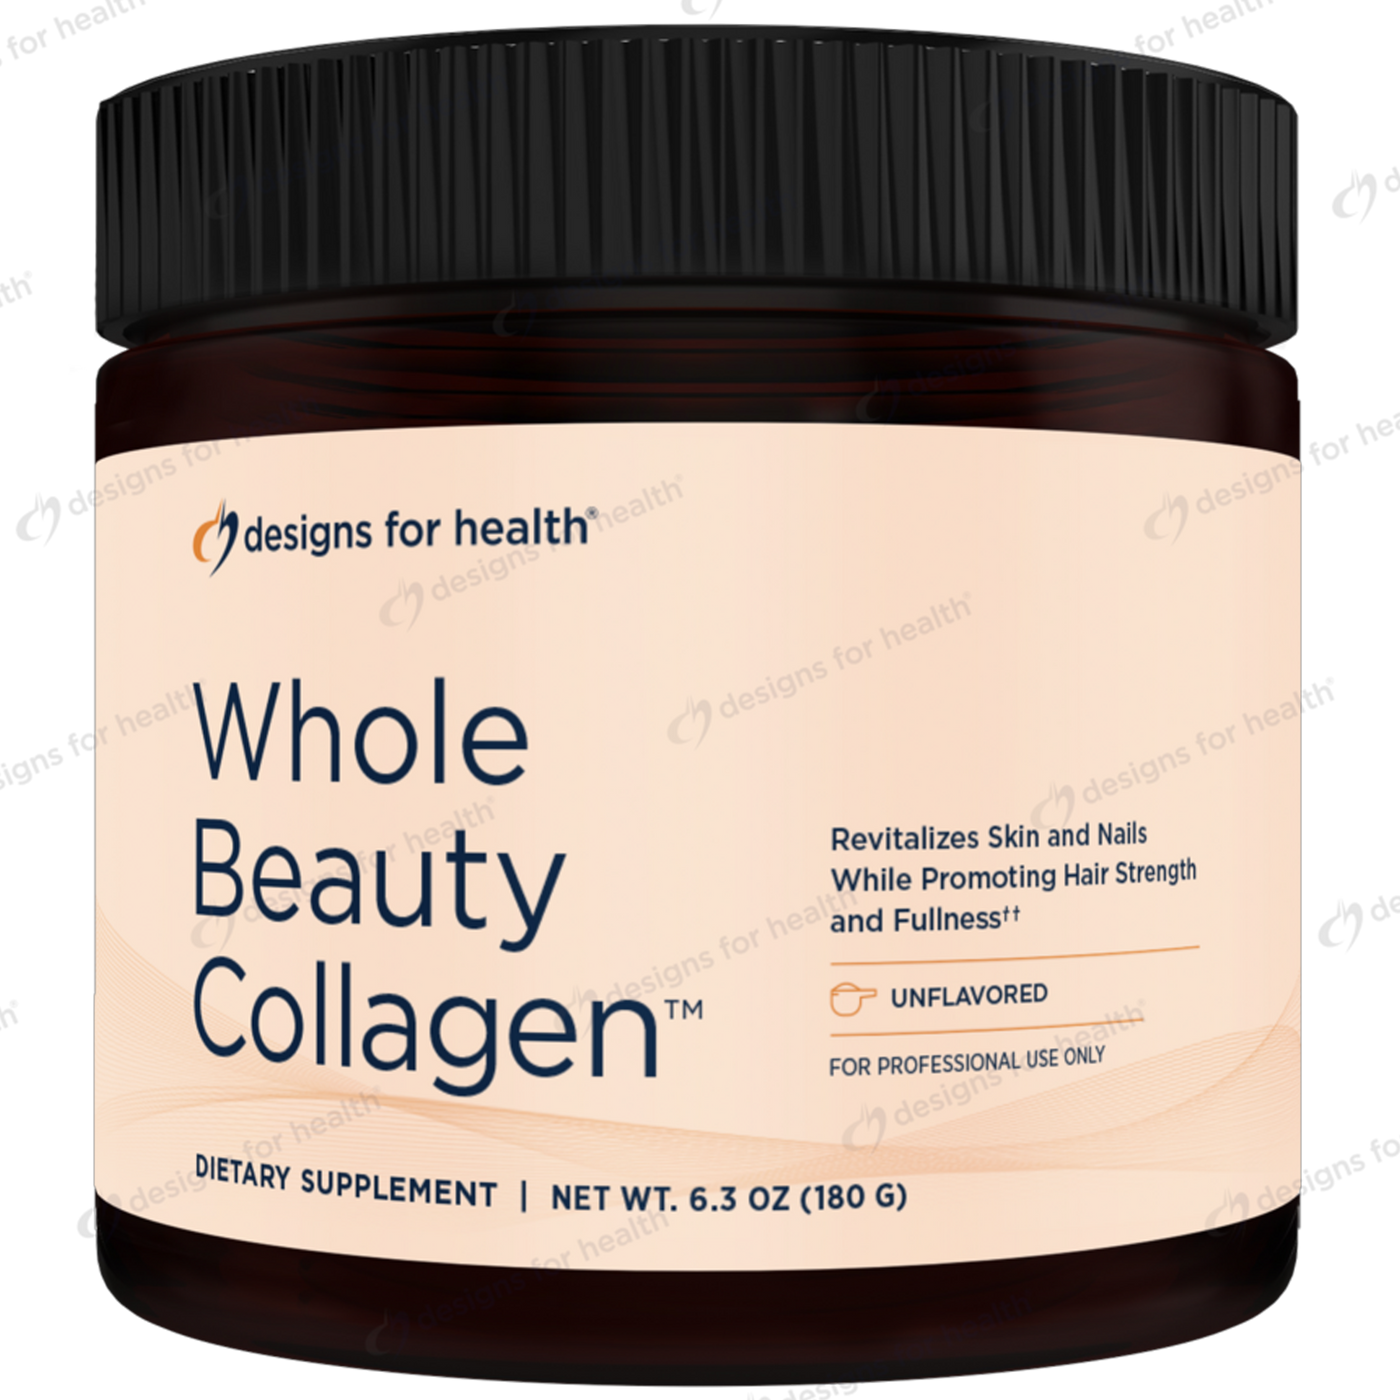 Whole Beauty Collagen 30 servings Curated Wellness